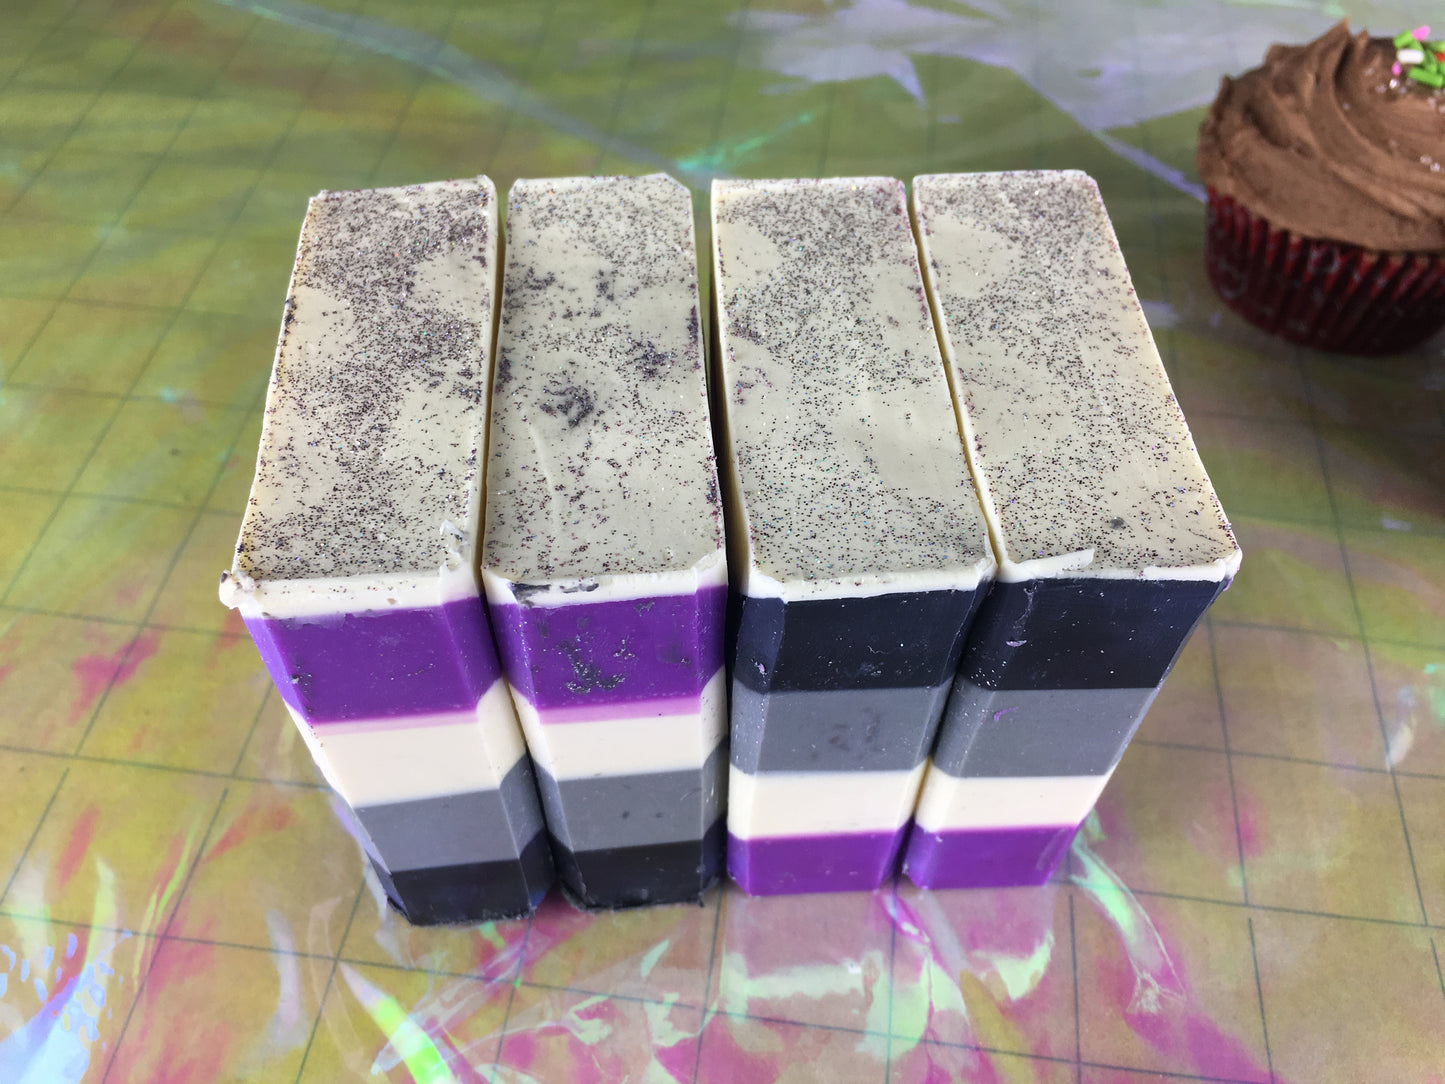 Rather Eat Cake (asexual pride flag) soap